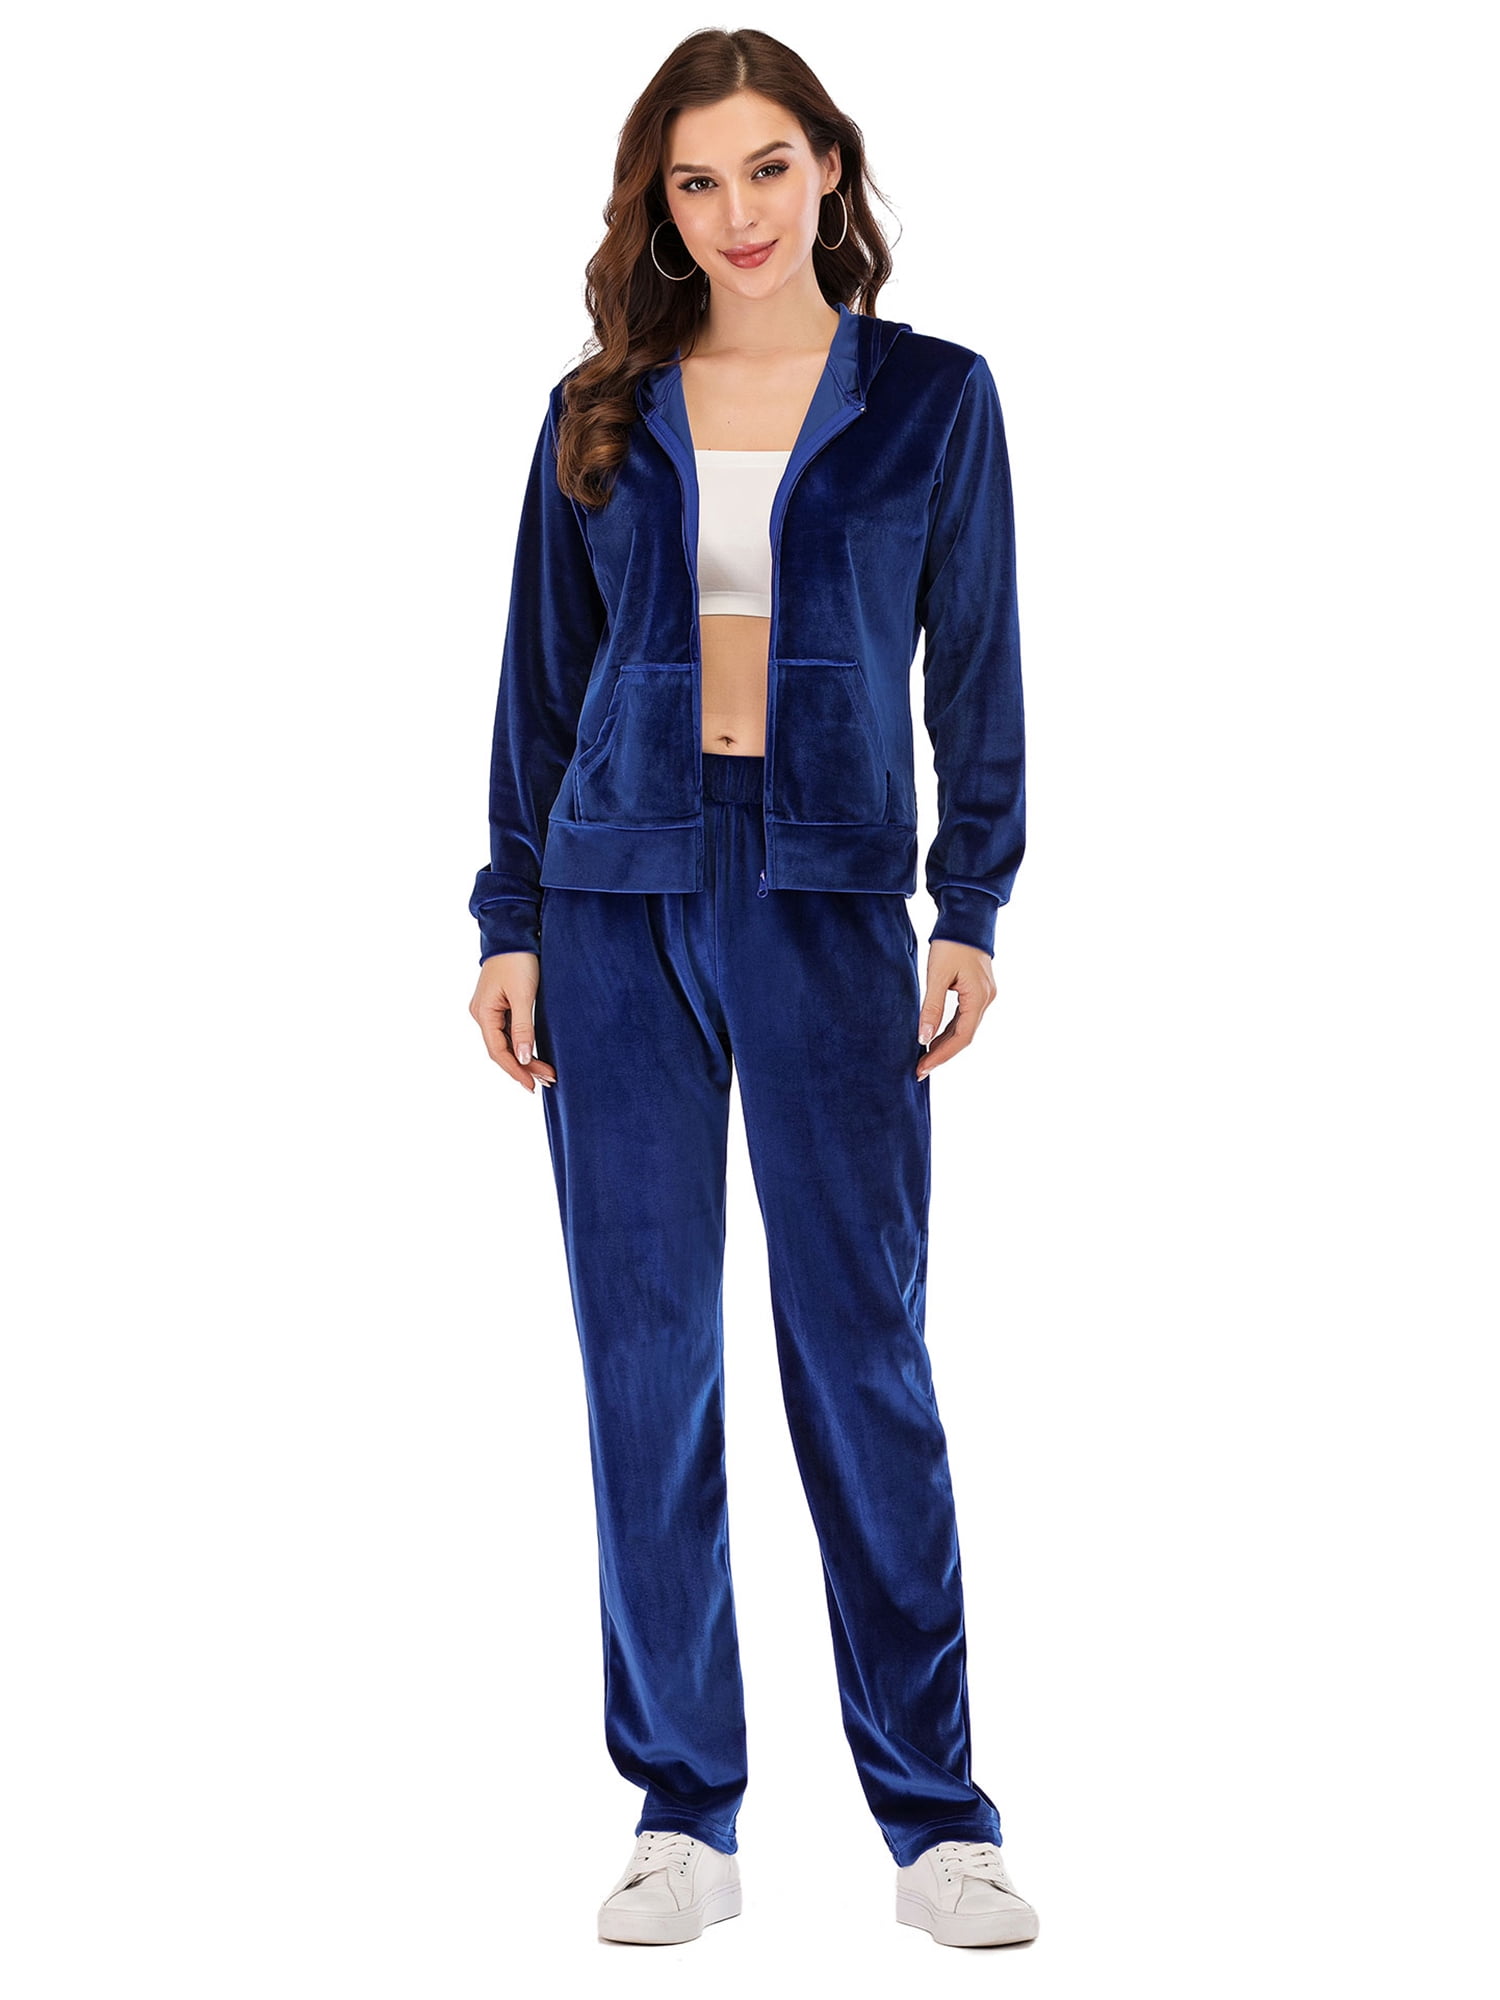 Buy Tracksuits Sets For Women Online in India - Monte Carlo